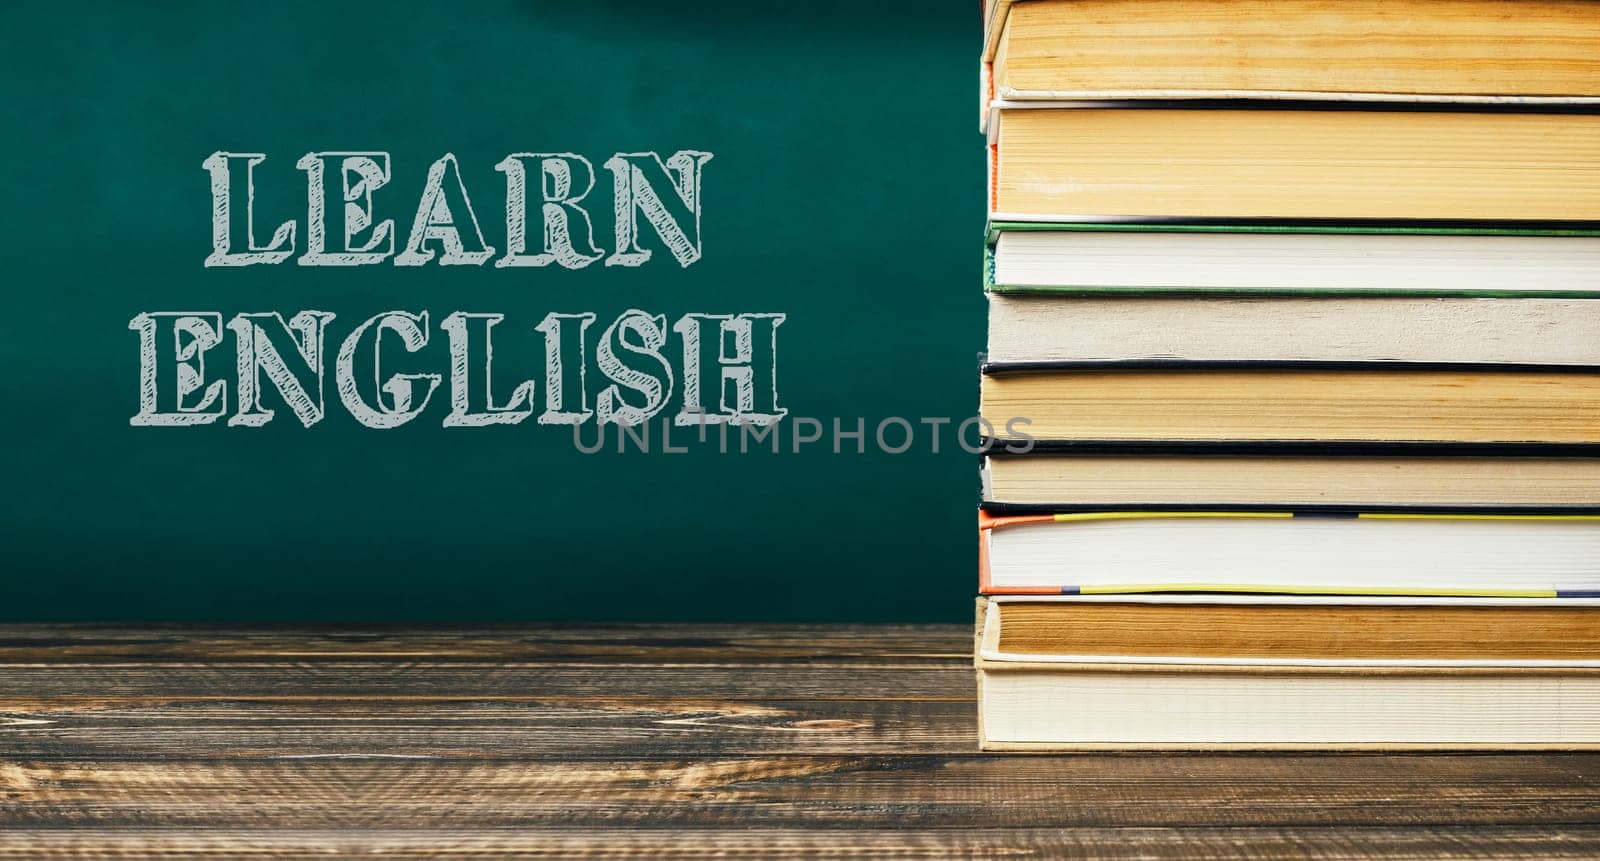 A stack of books with the word learn English written on a green chalkboard. The books are piled on top of each other, creating a sense of importance and emphasis on the subject